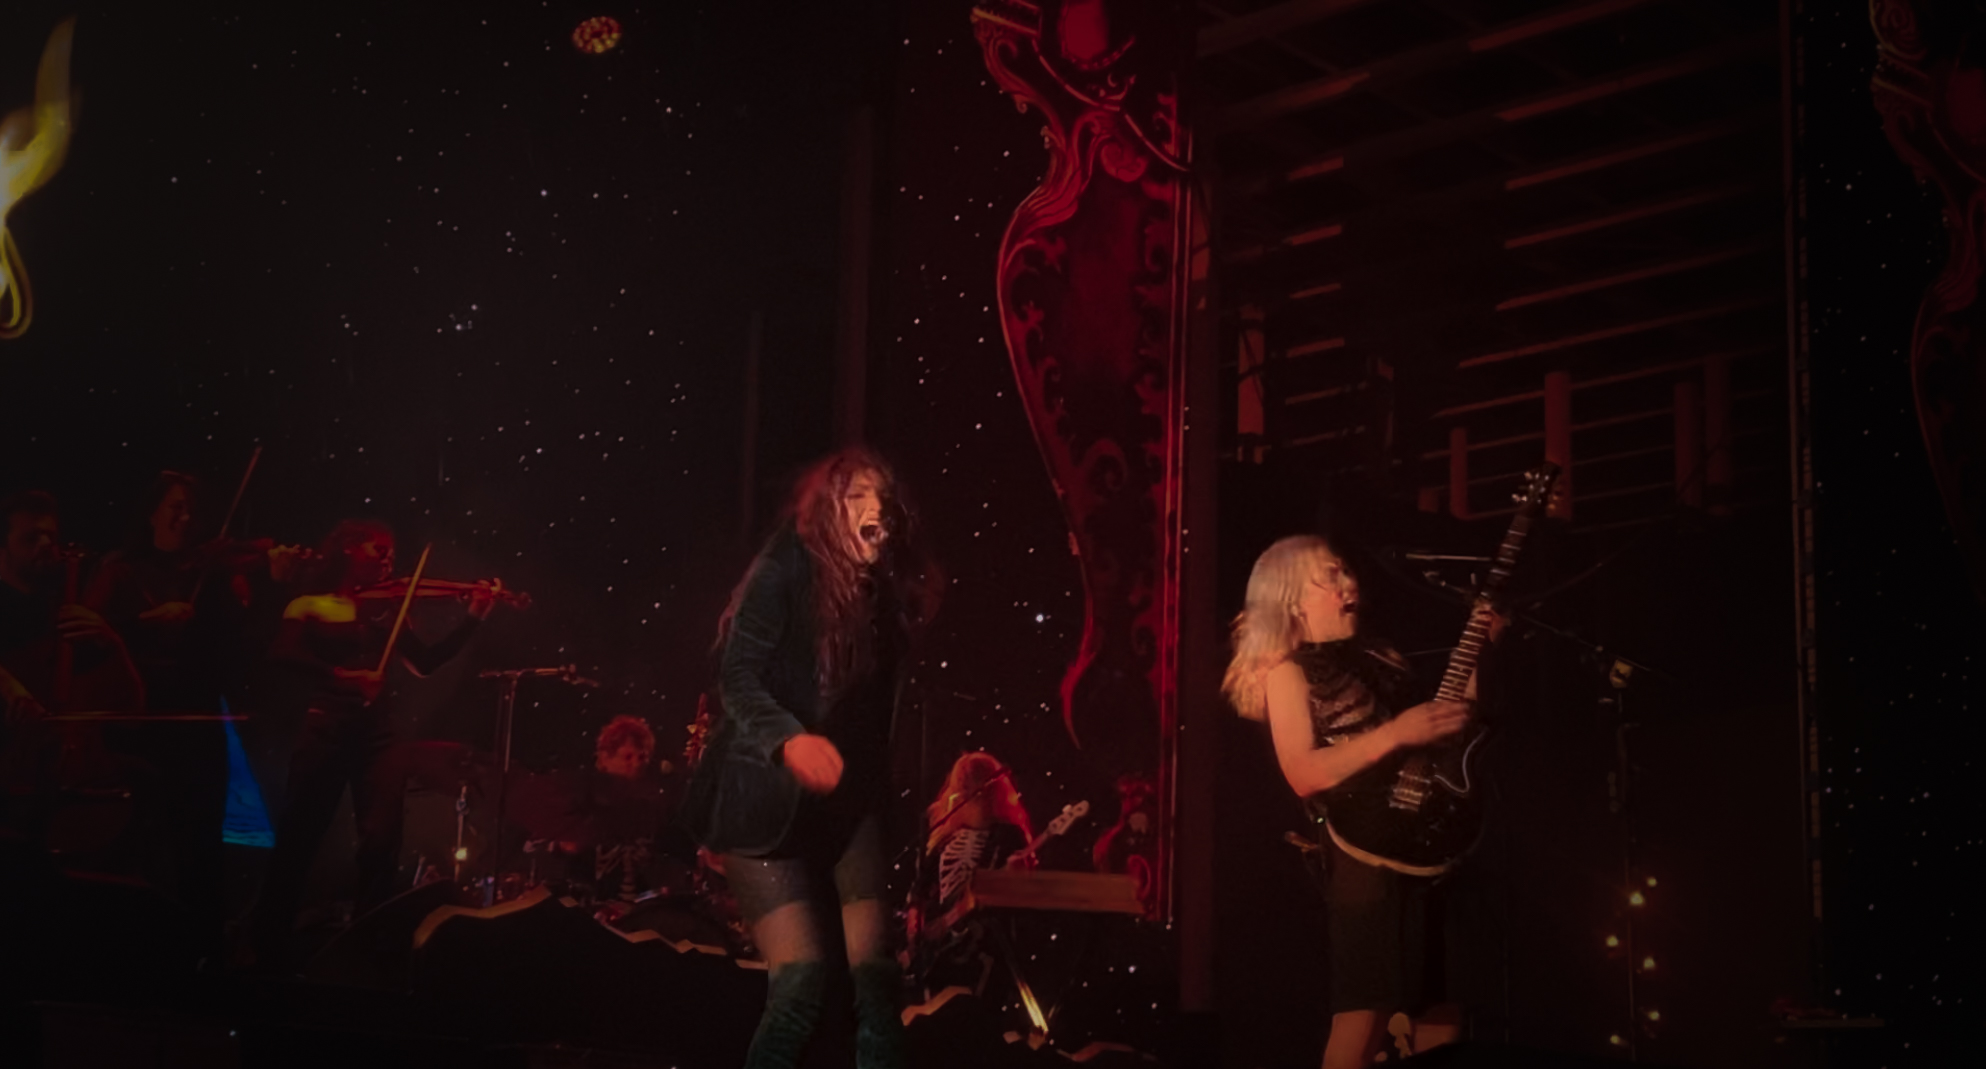 Phoebe Bridgers with a black electric guitar and Haley Dahl in royal blue blazer, backgrounded by red stage lighting.